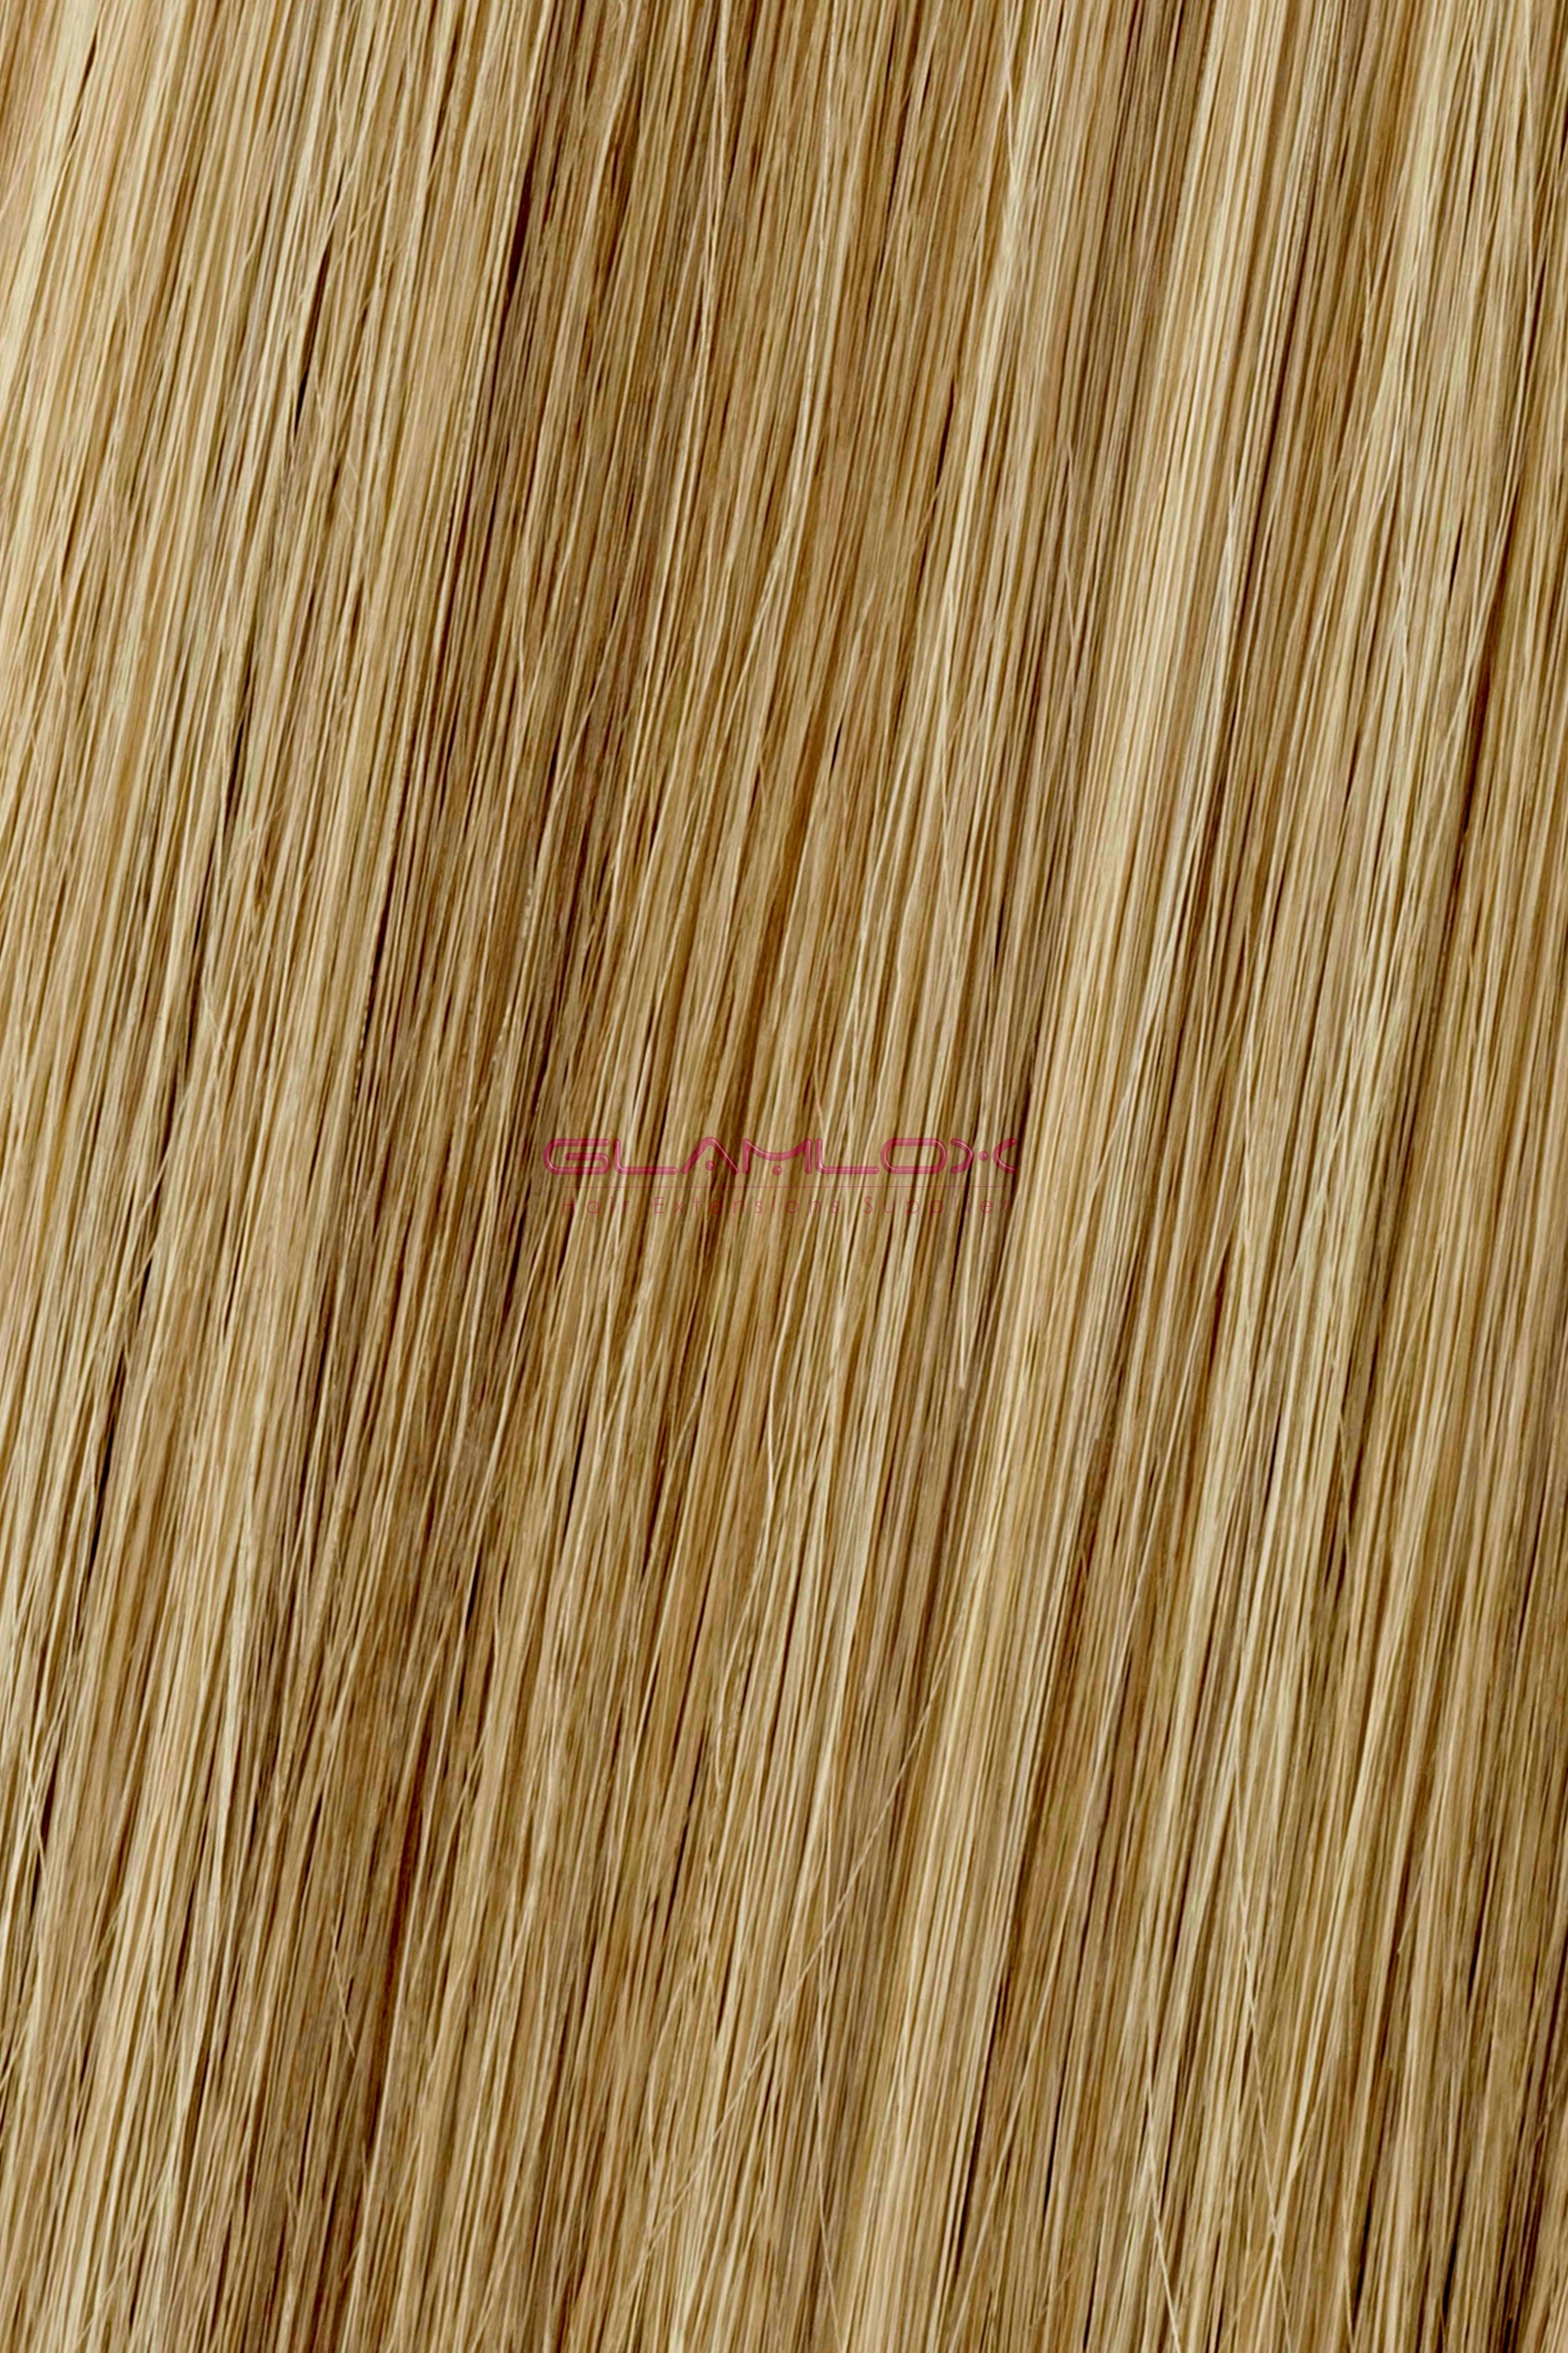 14" Nano Ring Hair Extensions - Russian Mongolian Double Drawn Remy Human Hair - 20 Strands